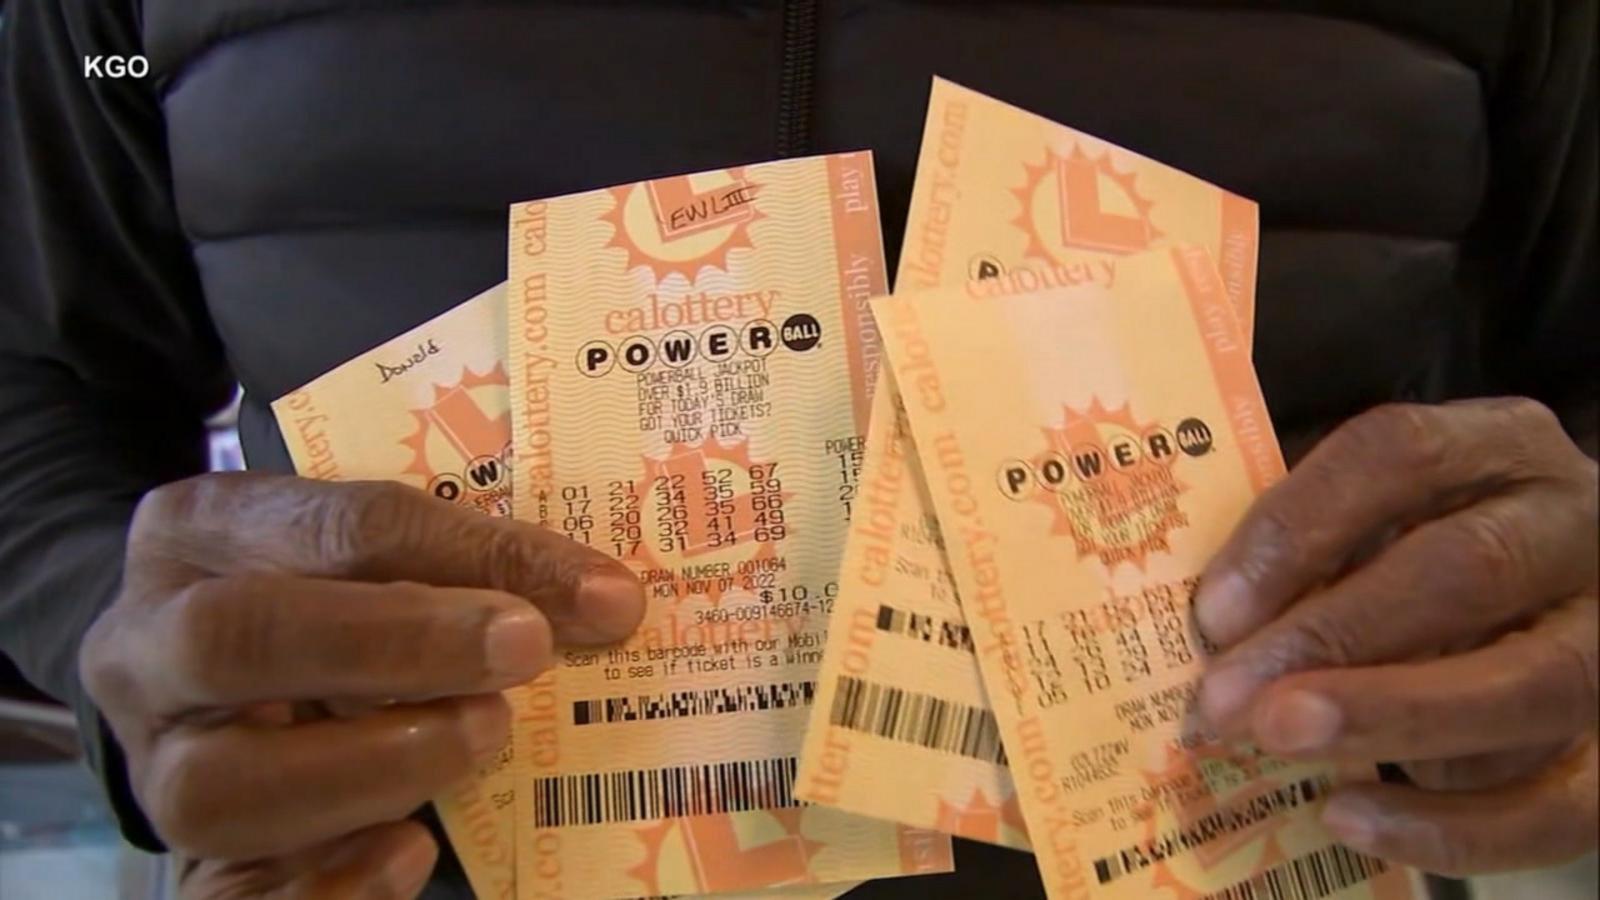 VIDEO: The Powerball lottery lawsuit